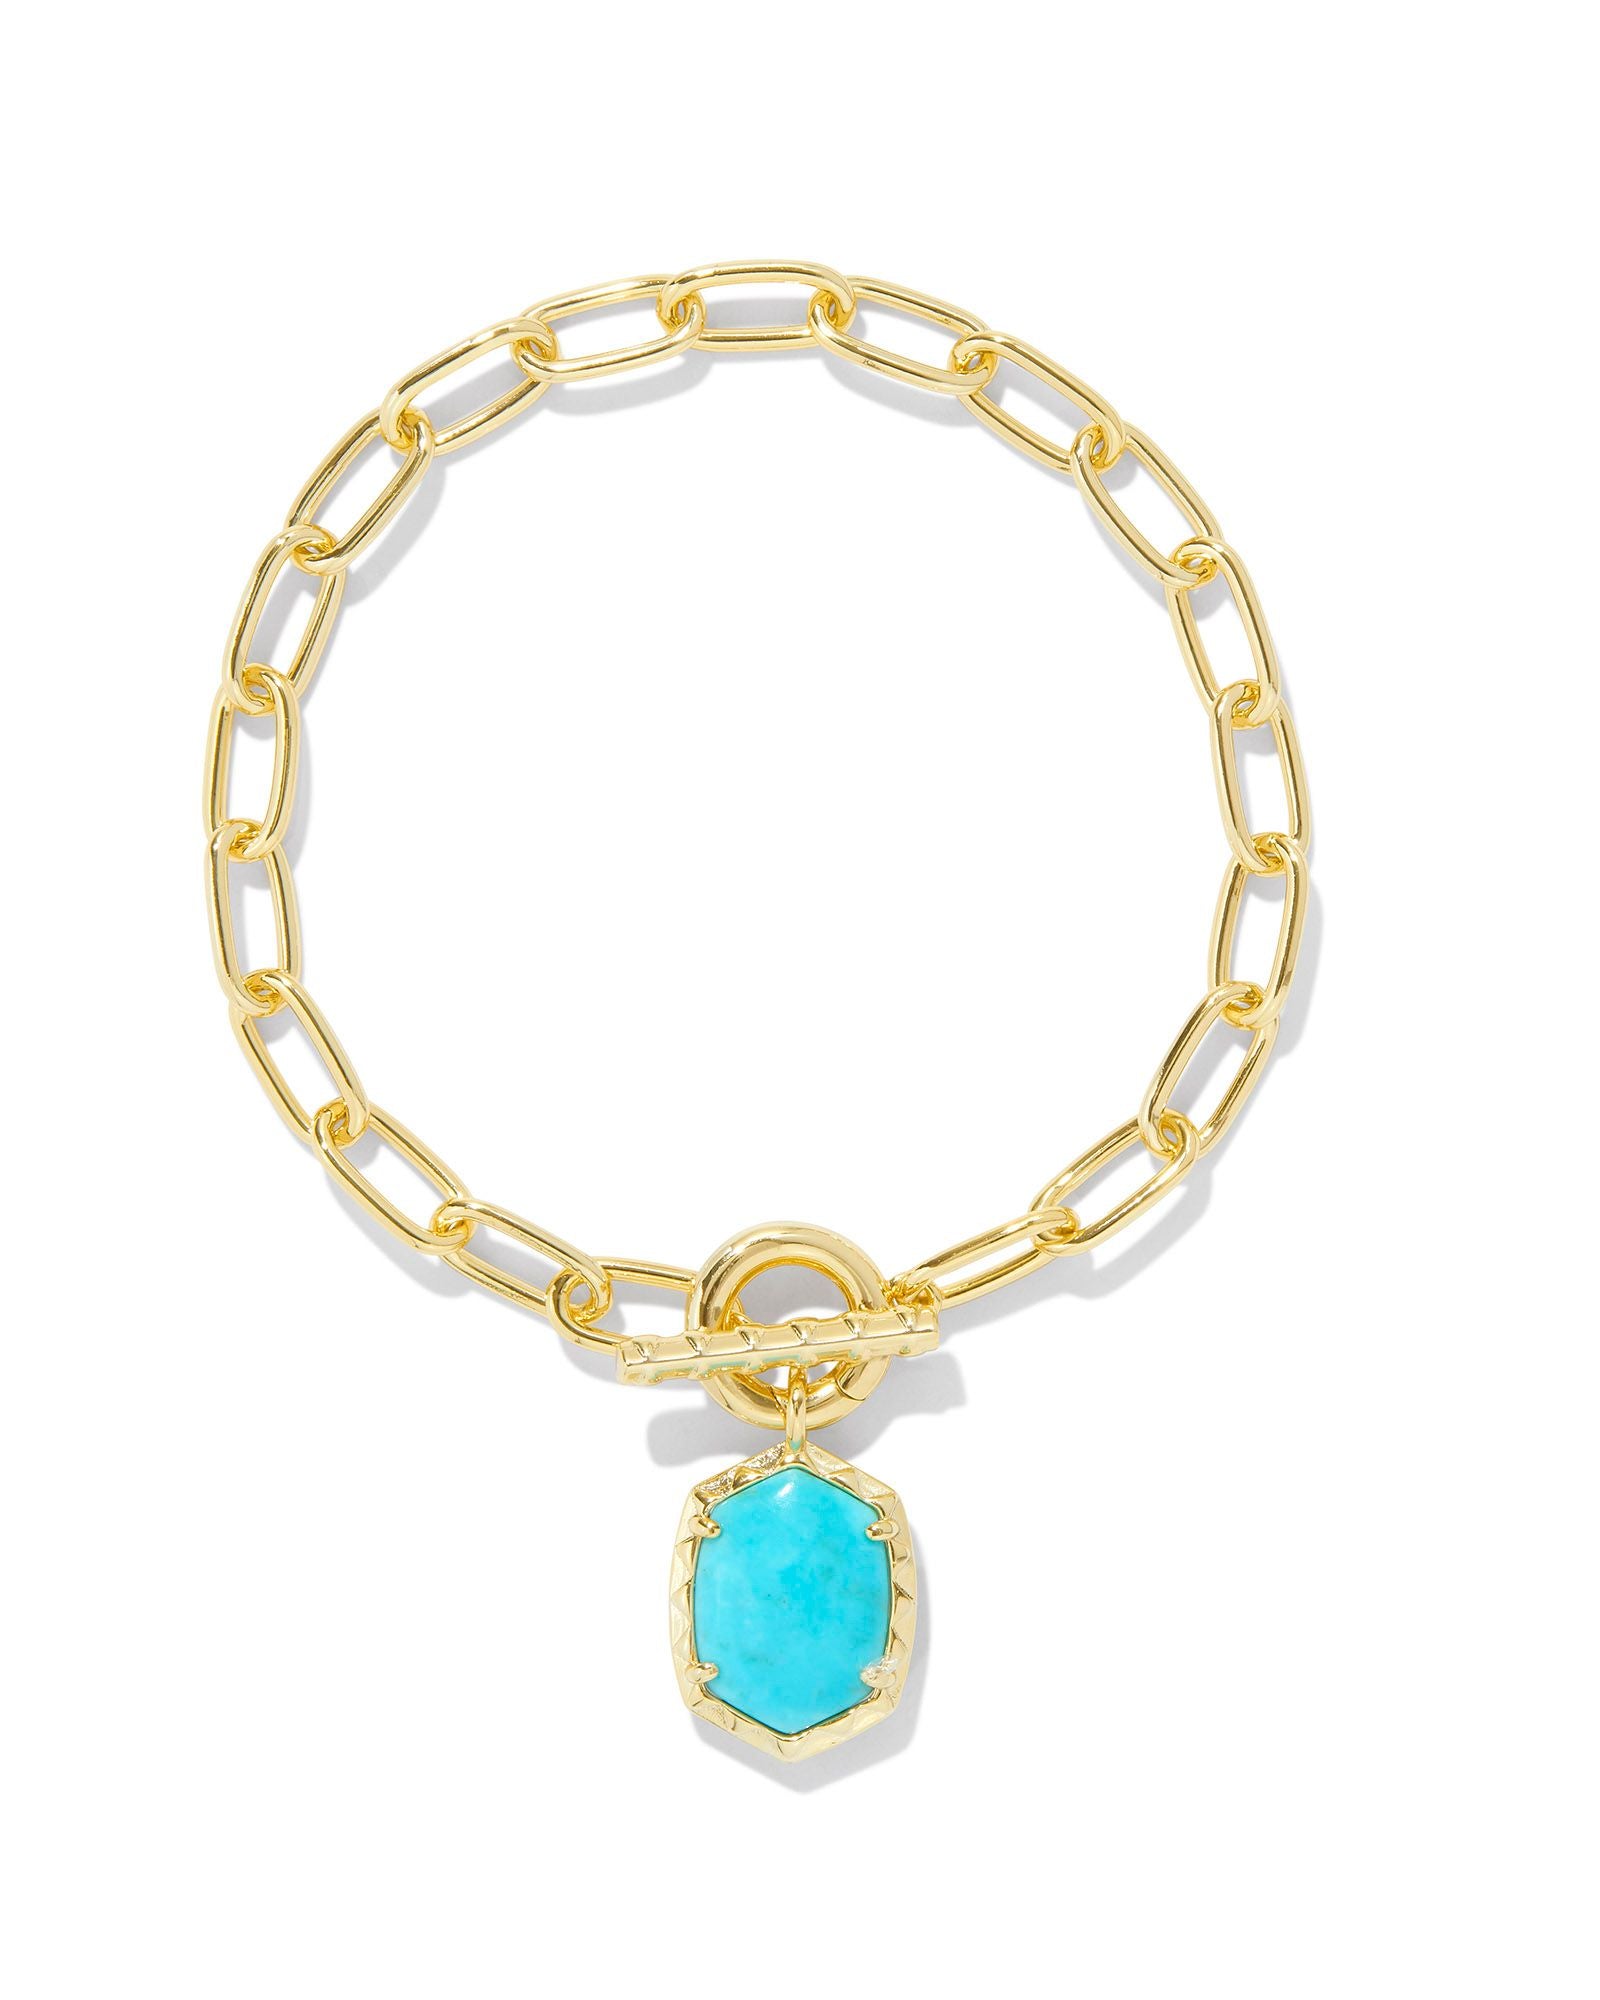 Daphne Link Chain Bracelet in Gold Variegated Turquoise